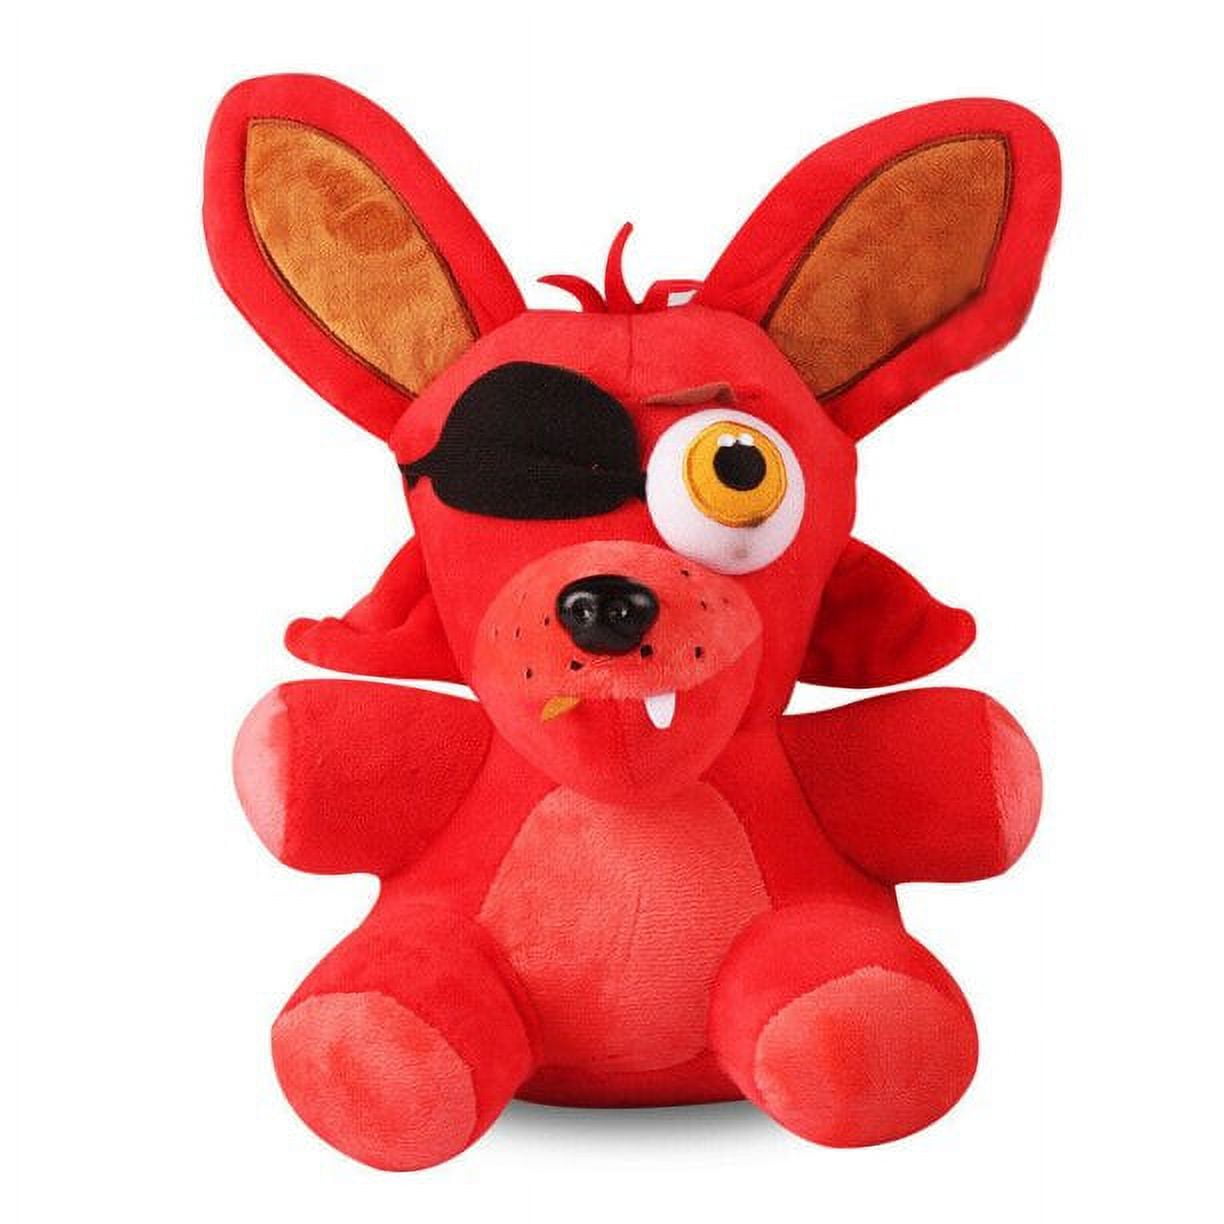 10 FNAF Five Nights at Freddy's FOXY PIRATE Plush Soft Doll Toy S200 